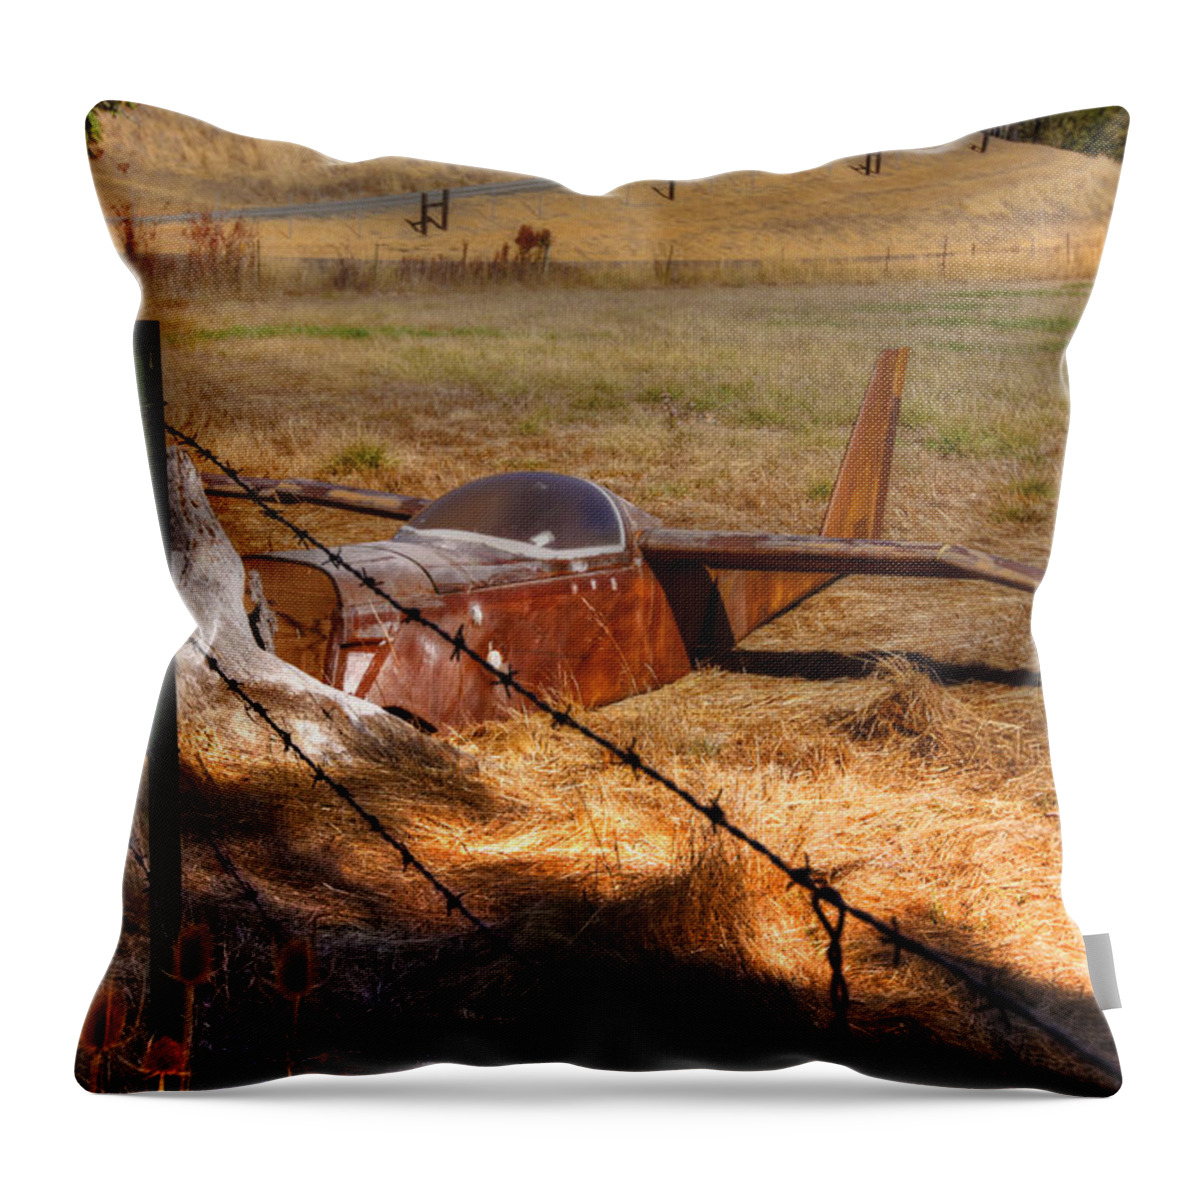 Sepia Throw Pillow featuring the photograph Not Ready For Takeoff by Kandy Hurley